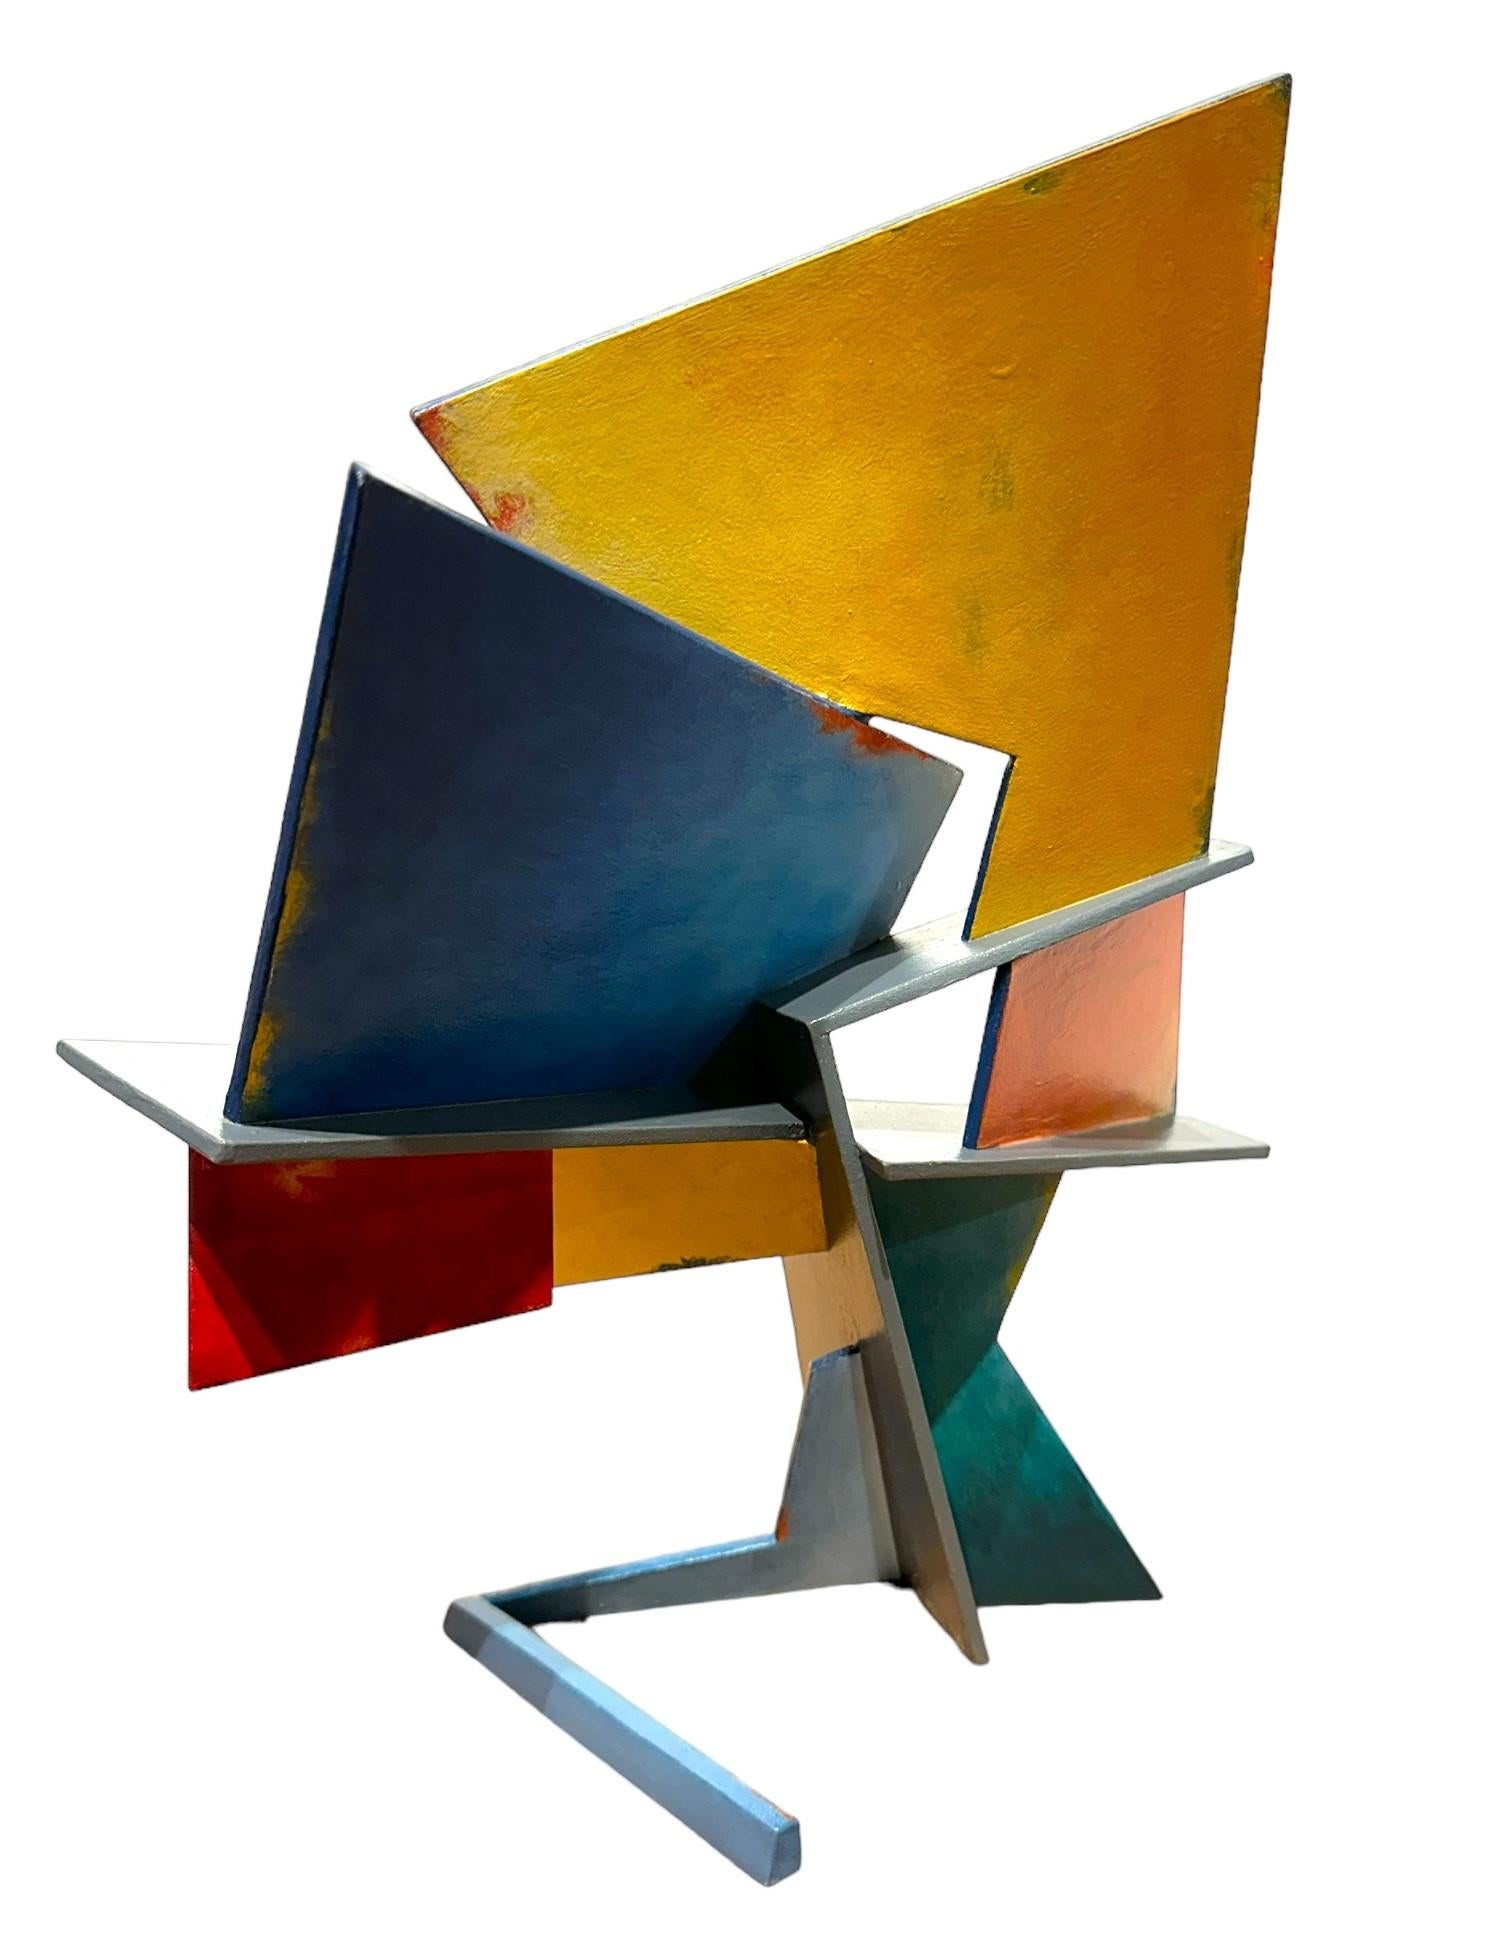 Zia Rising - Geometric Steel Sculpture, Welded Steel, Hand Painted Acrylic For Sale 3